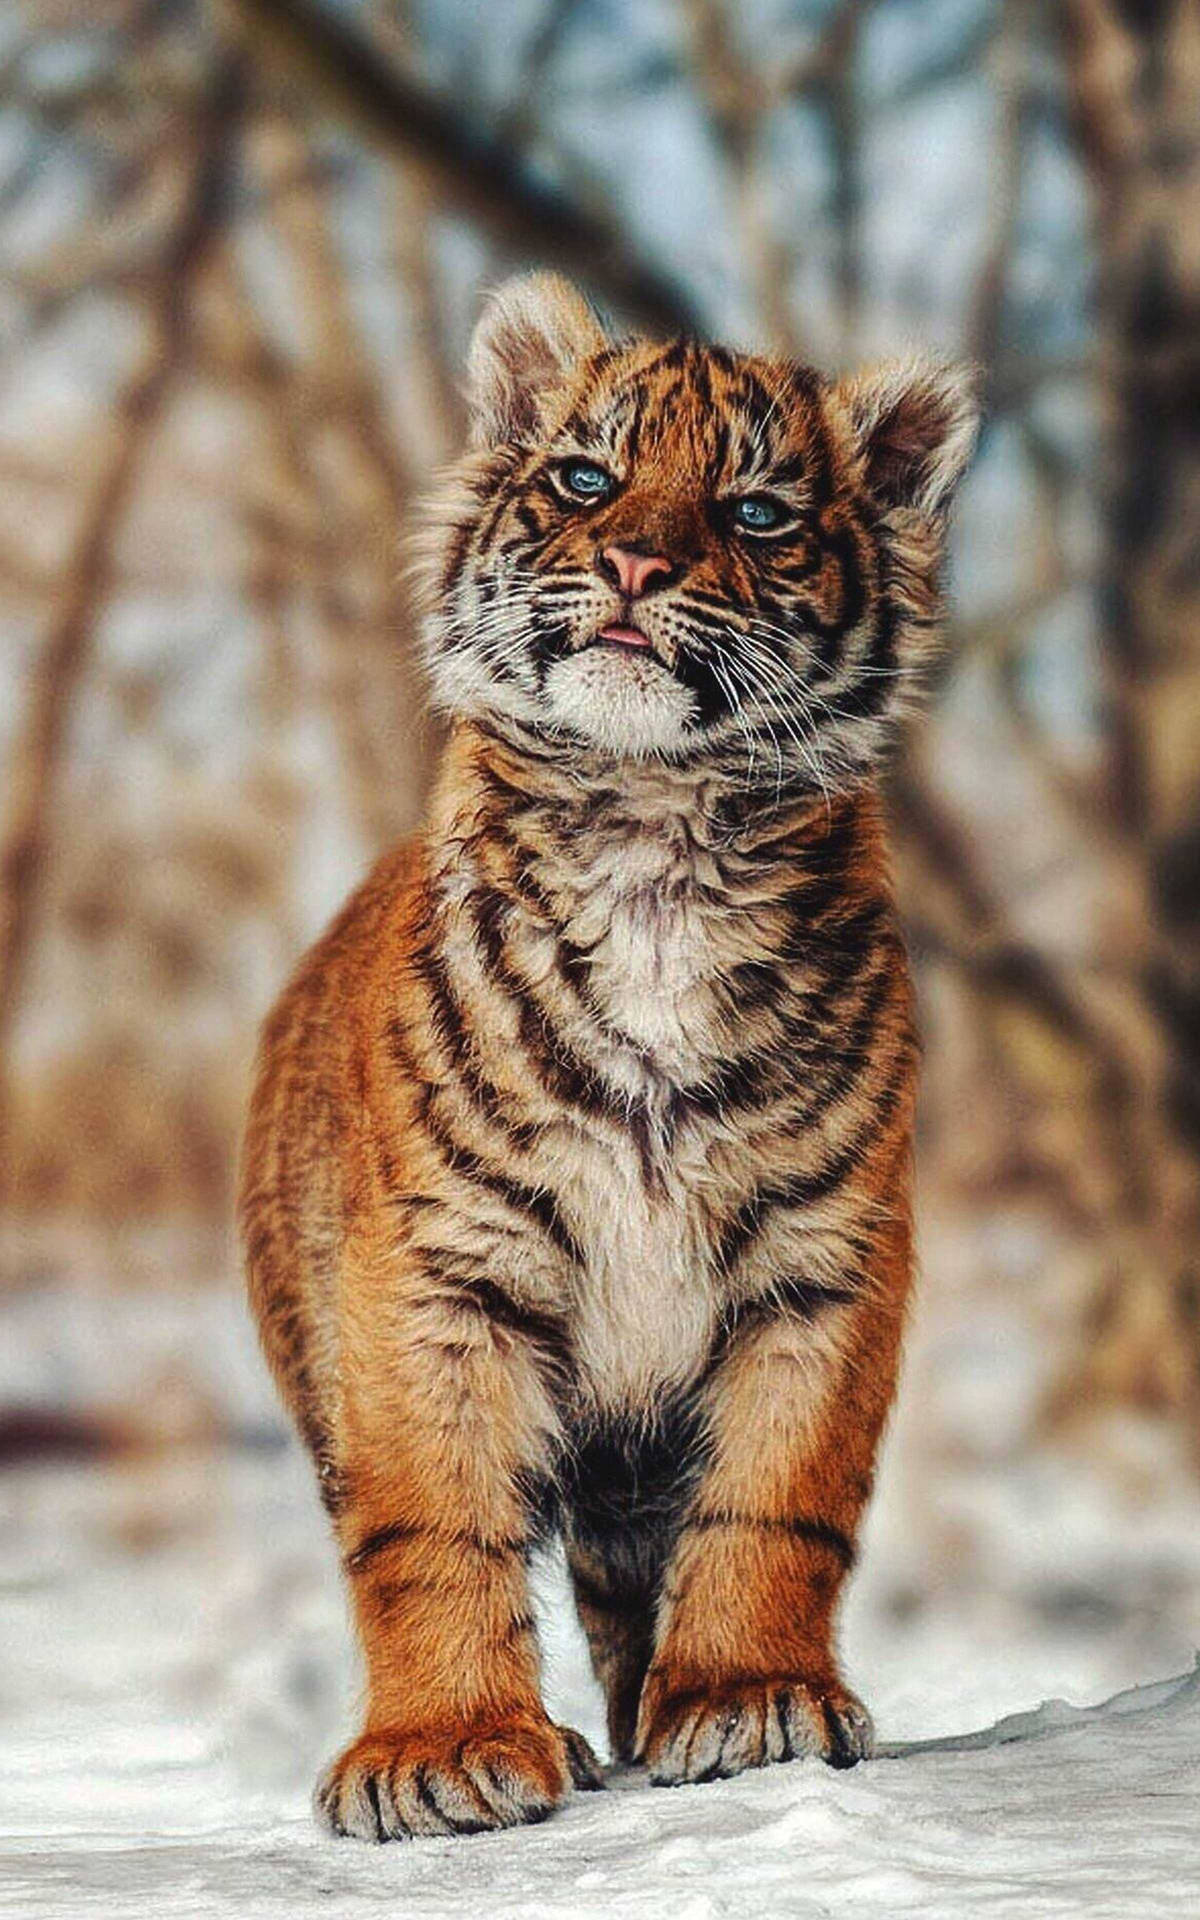 Baby Tiger In Snow